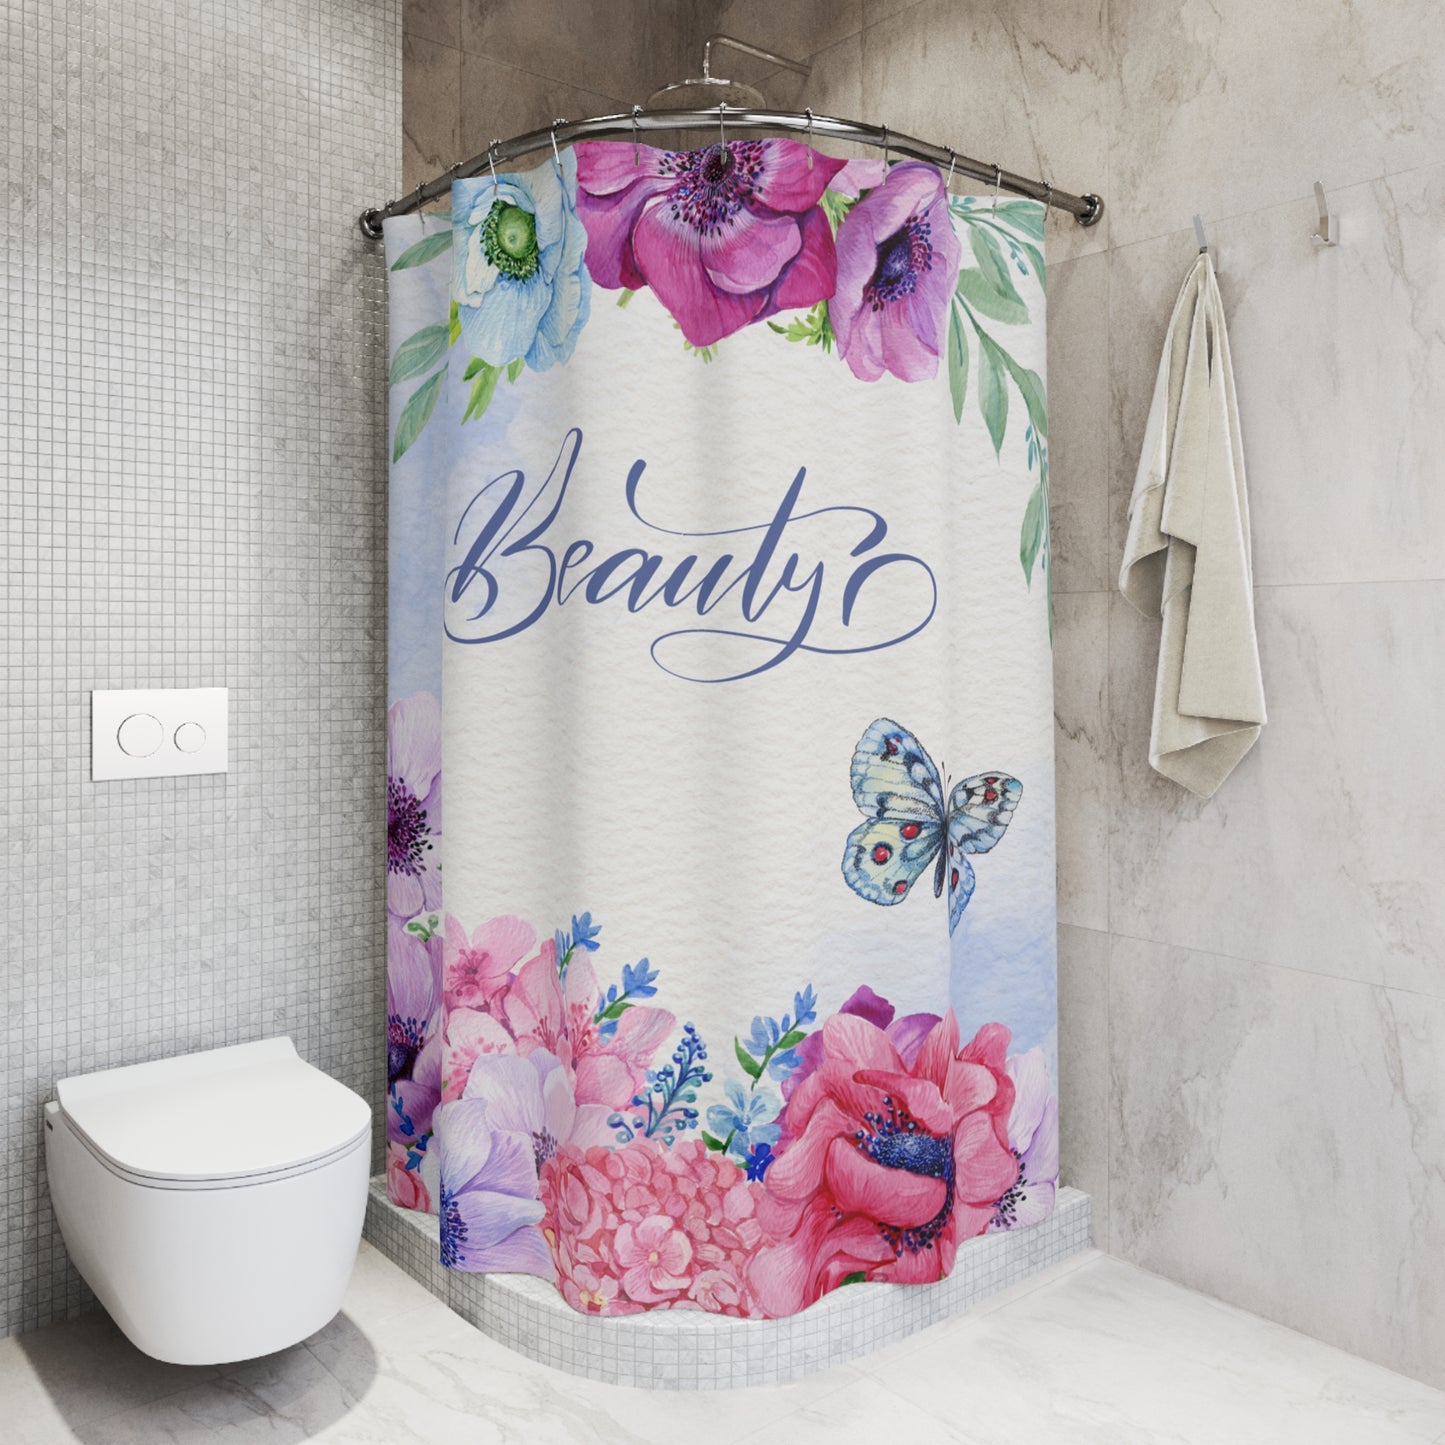 Polyester Shower Curtain